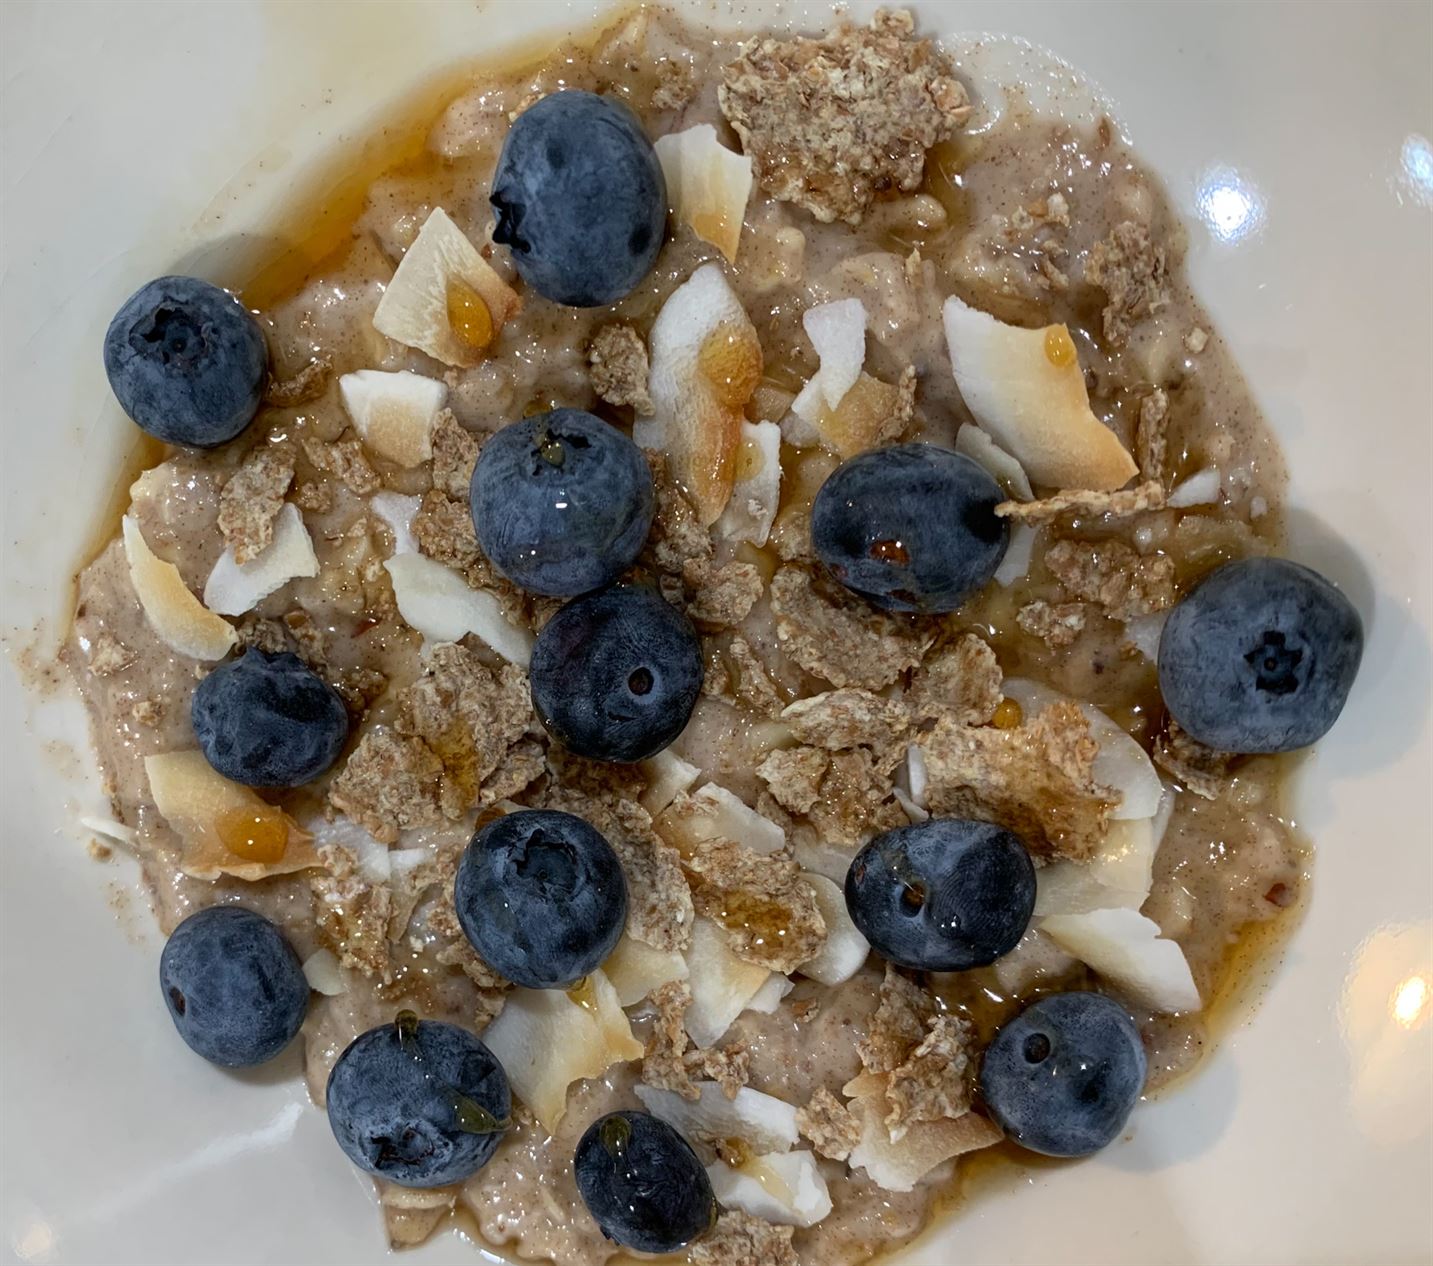 One of Gourmet Bailey's breakfast or dessert staples: oats, topped with cereal, berries, toasted coconut and maple syrup. Samantha Bailey | The Montclarion